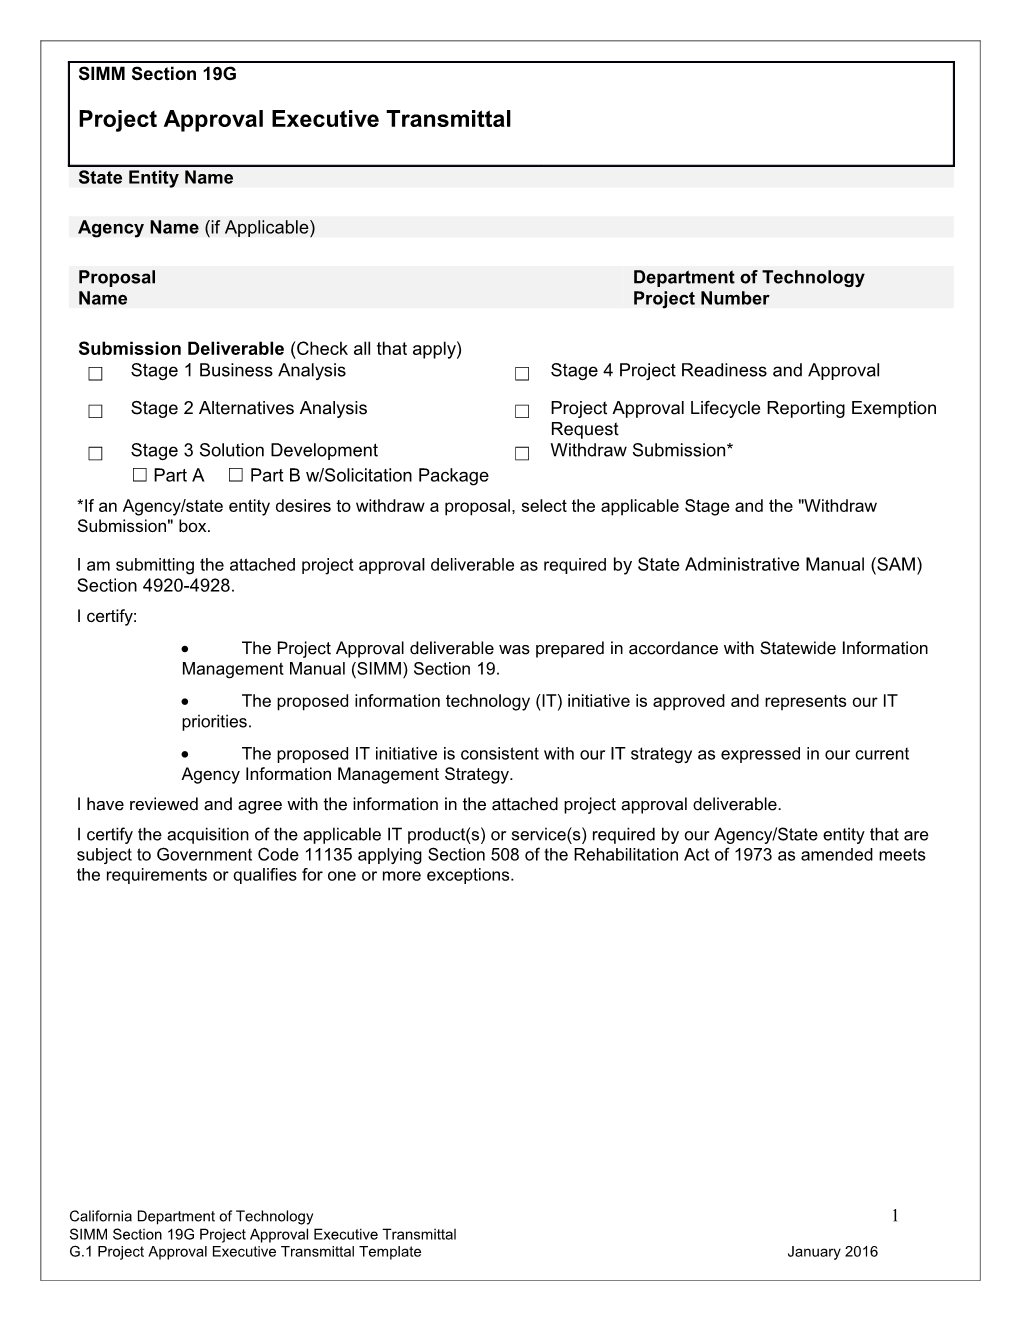 G.1 Project Approval Executive Transmittal Template